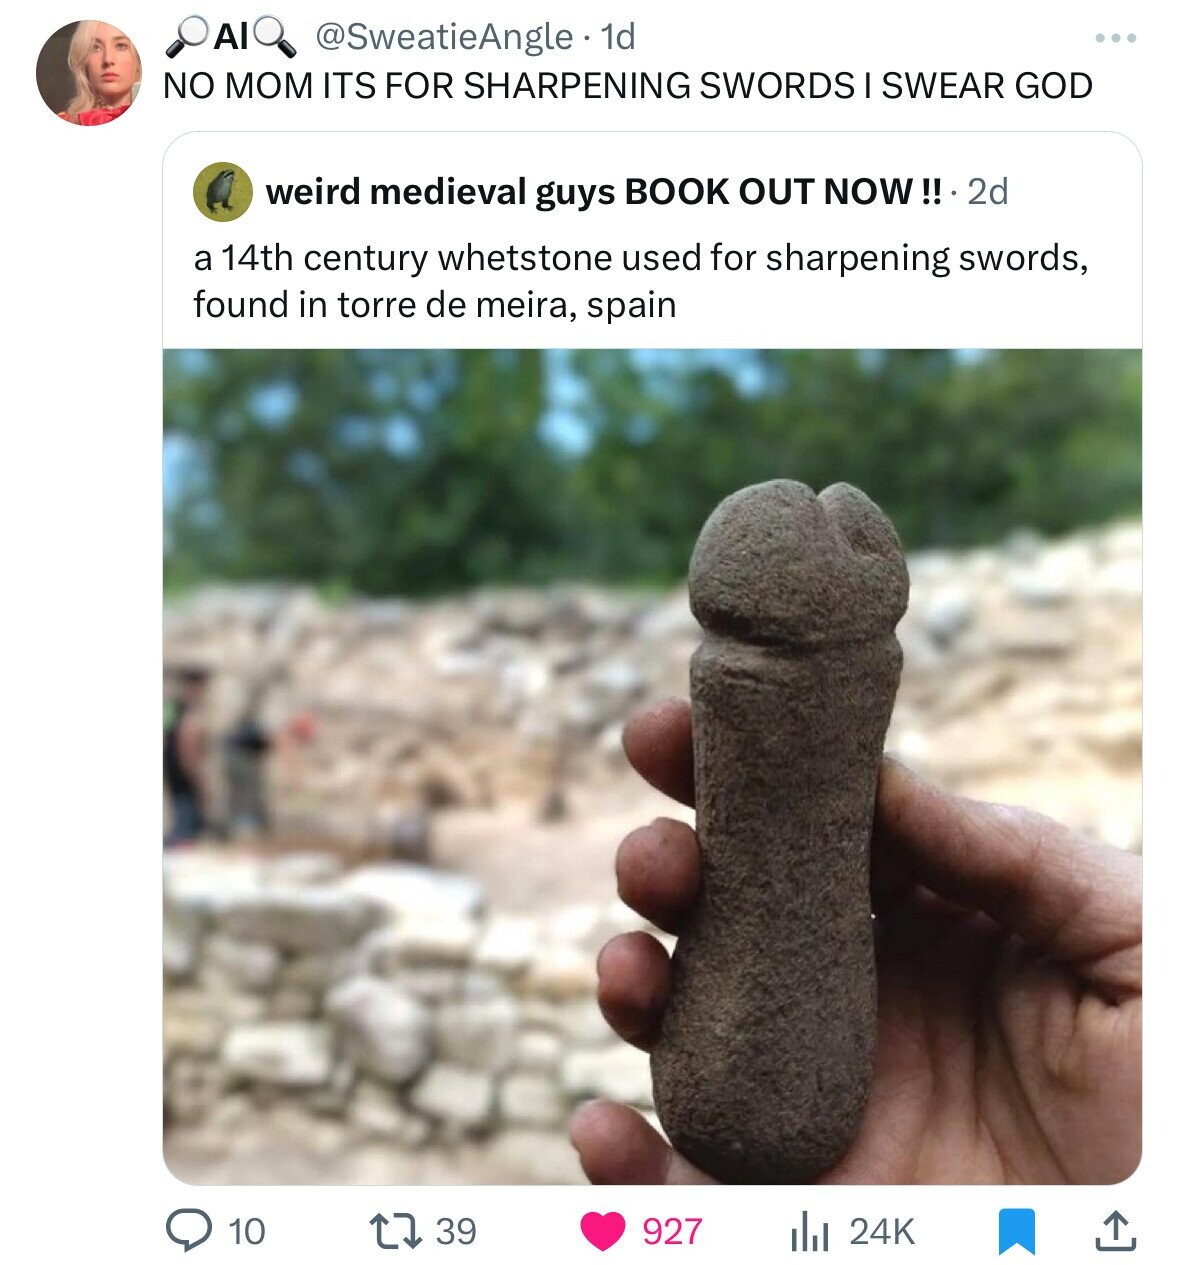 Al @SweatieAngle 1d NO MOM ITS FOR SHARPENING SWORDS SWEAR GOD weird medieval guys BOOK OUT NOW!!.2 2d a 14th century whetstone used for sharpening swords, found in torre de meira, spain 10 39 927 24K 